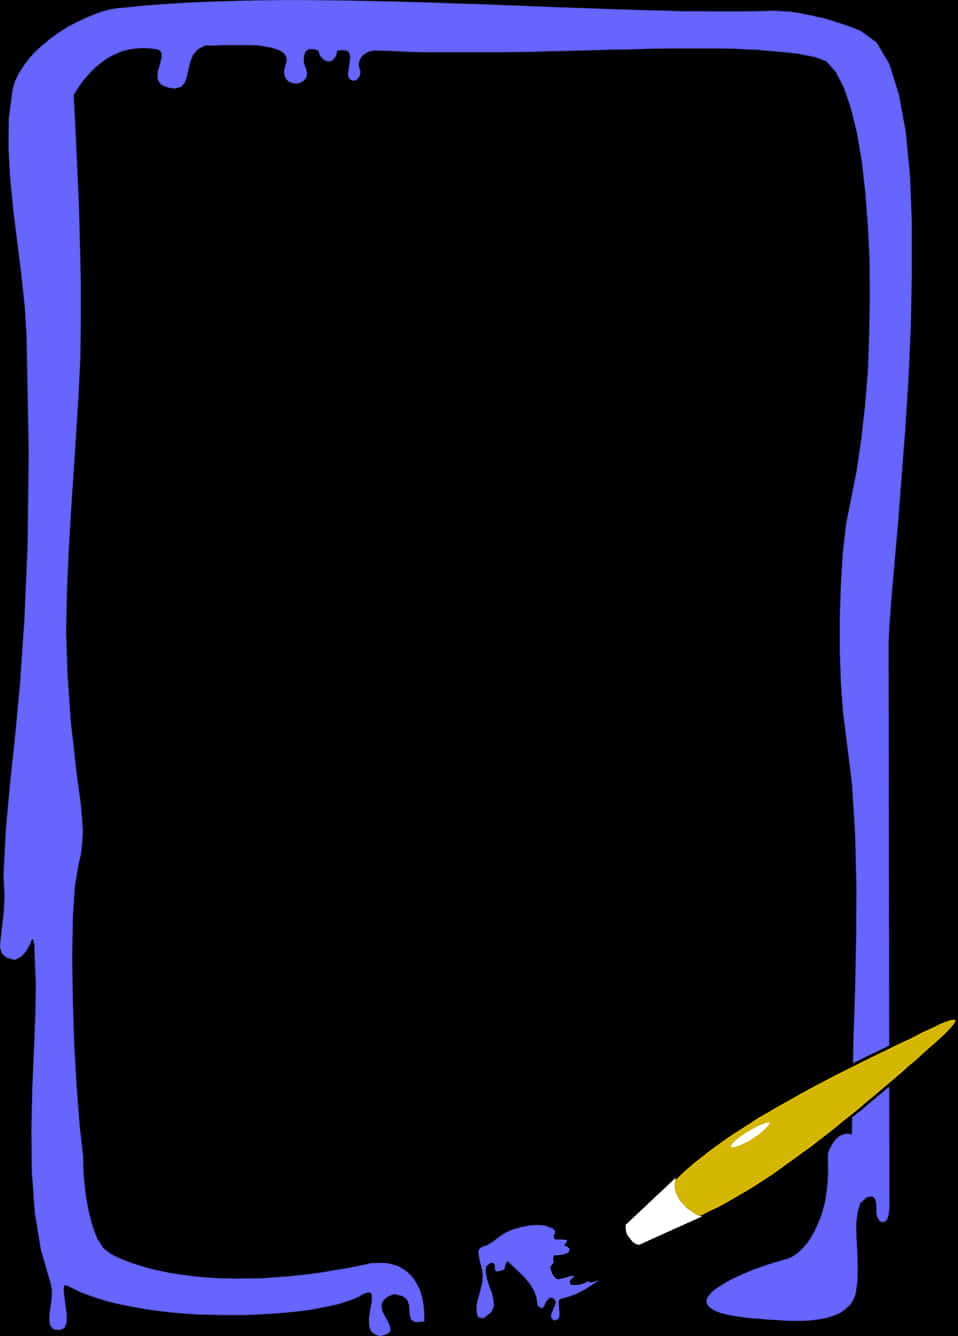 A Blue And Yellow Paint Brush On A Black Background